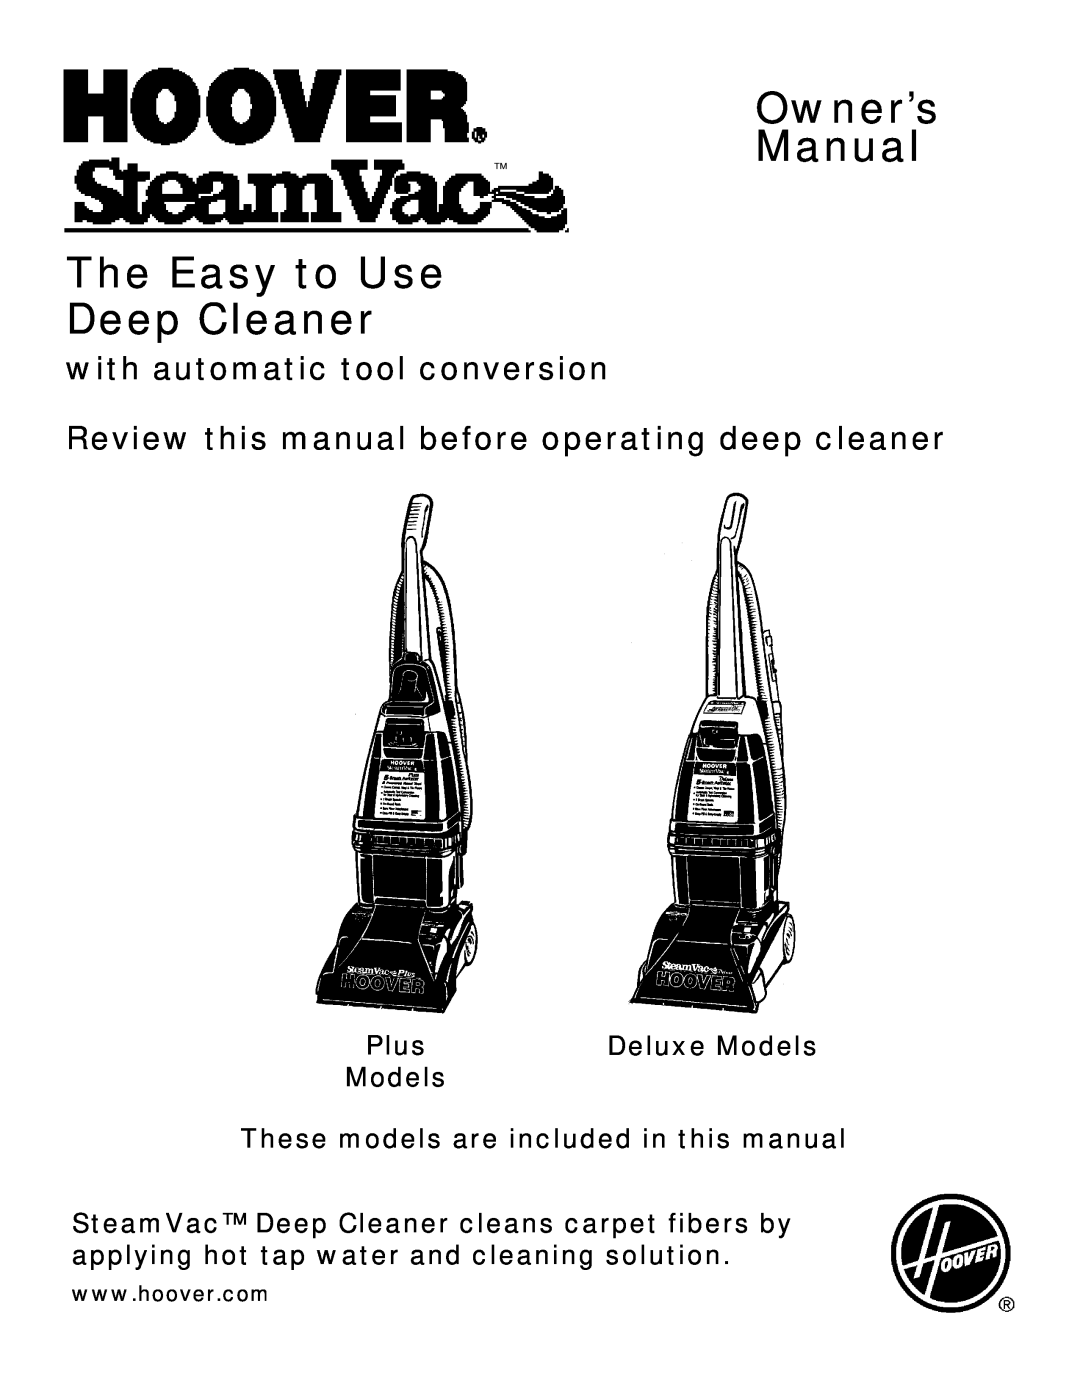 Hoover Plus owner manual Owner’s Manual, The Easy to Use Deep Cleaner, with automatic tool conversion, Deluxe Models 